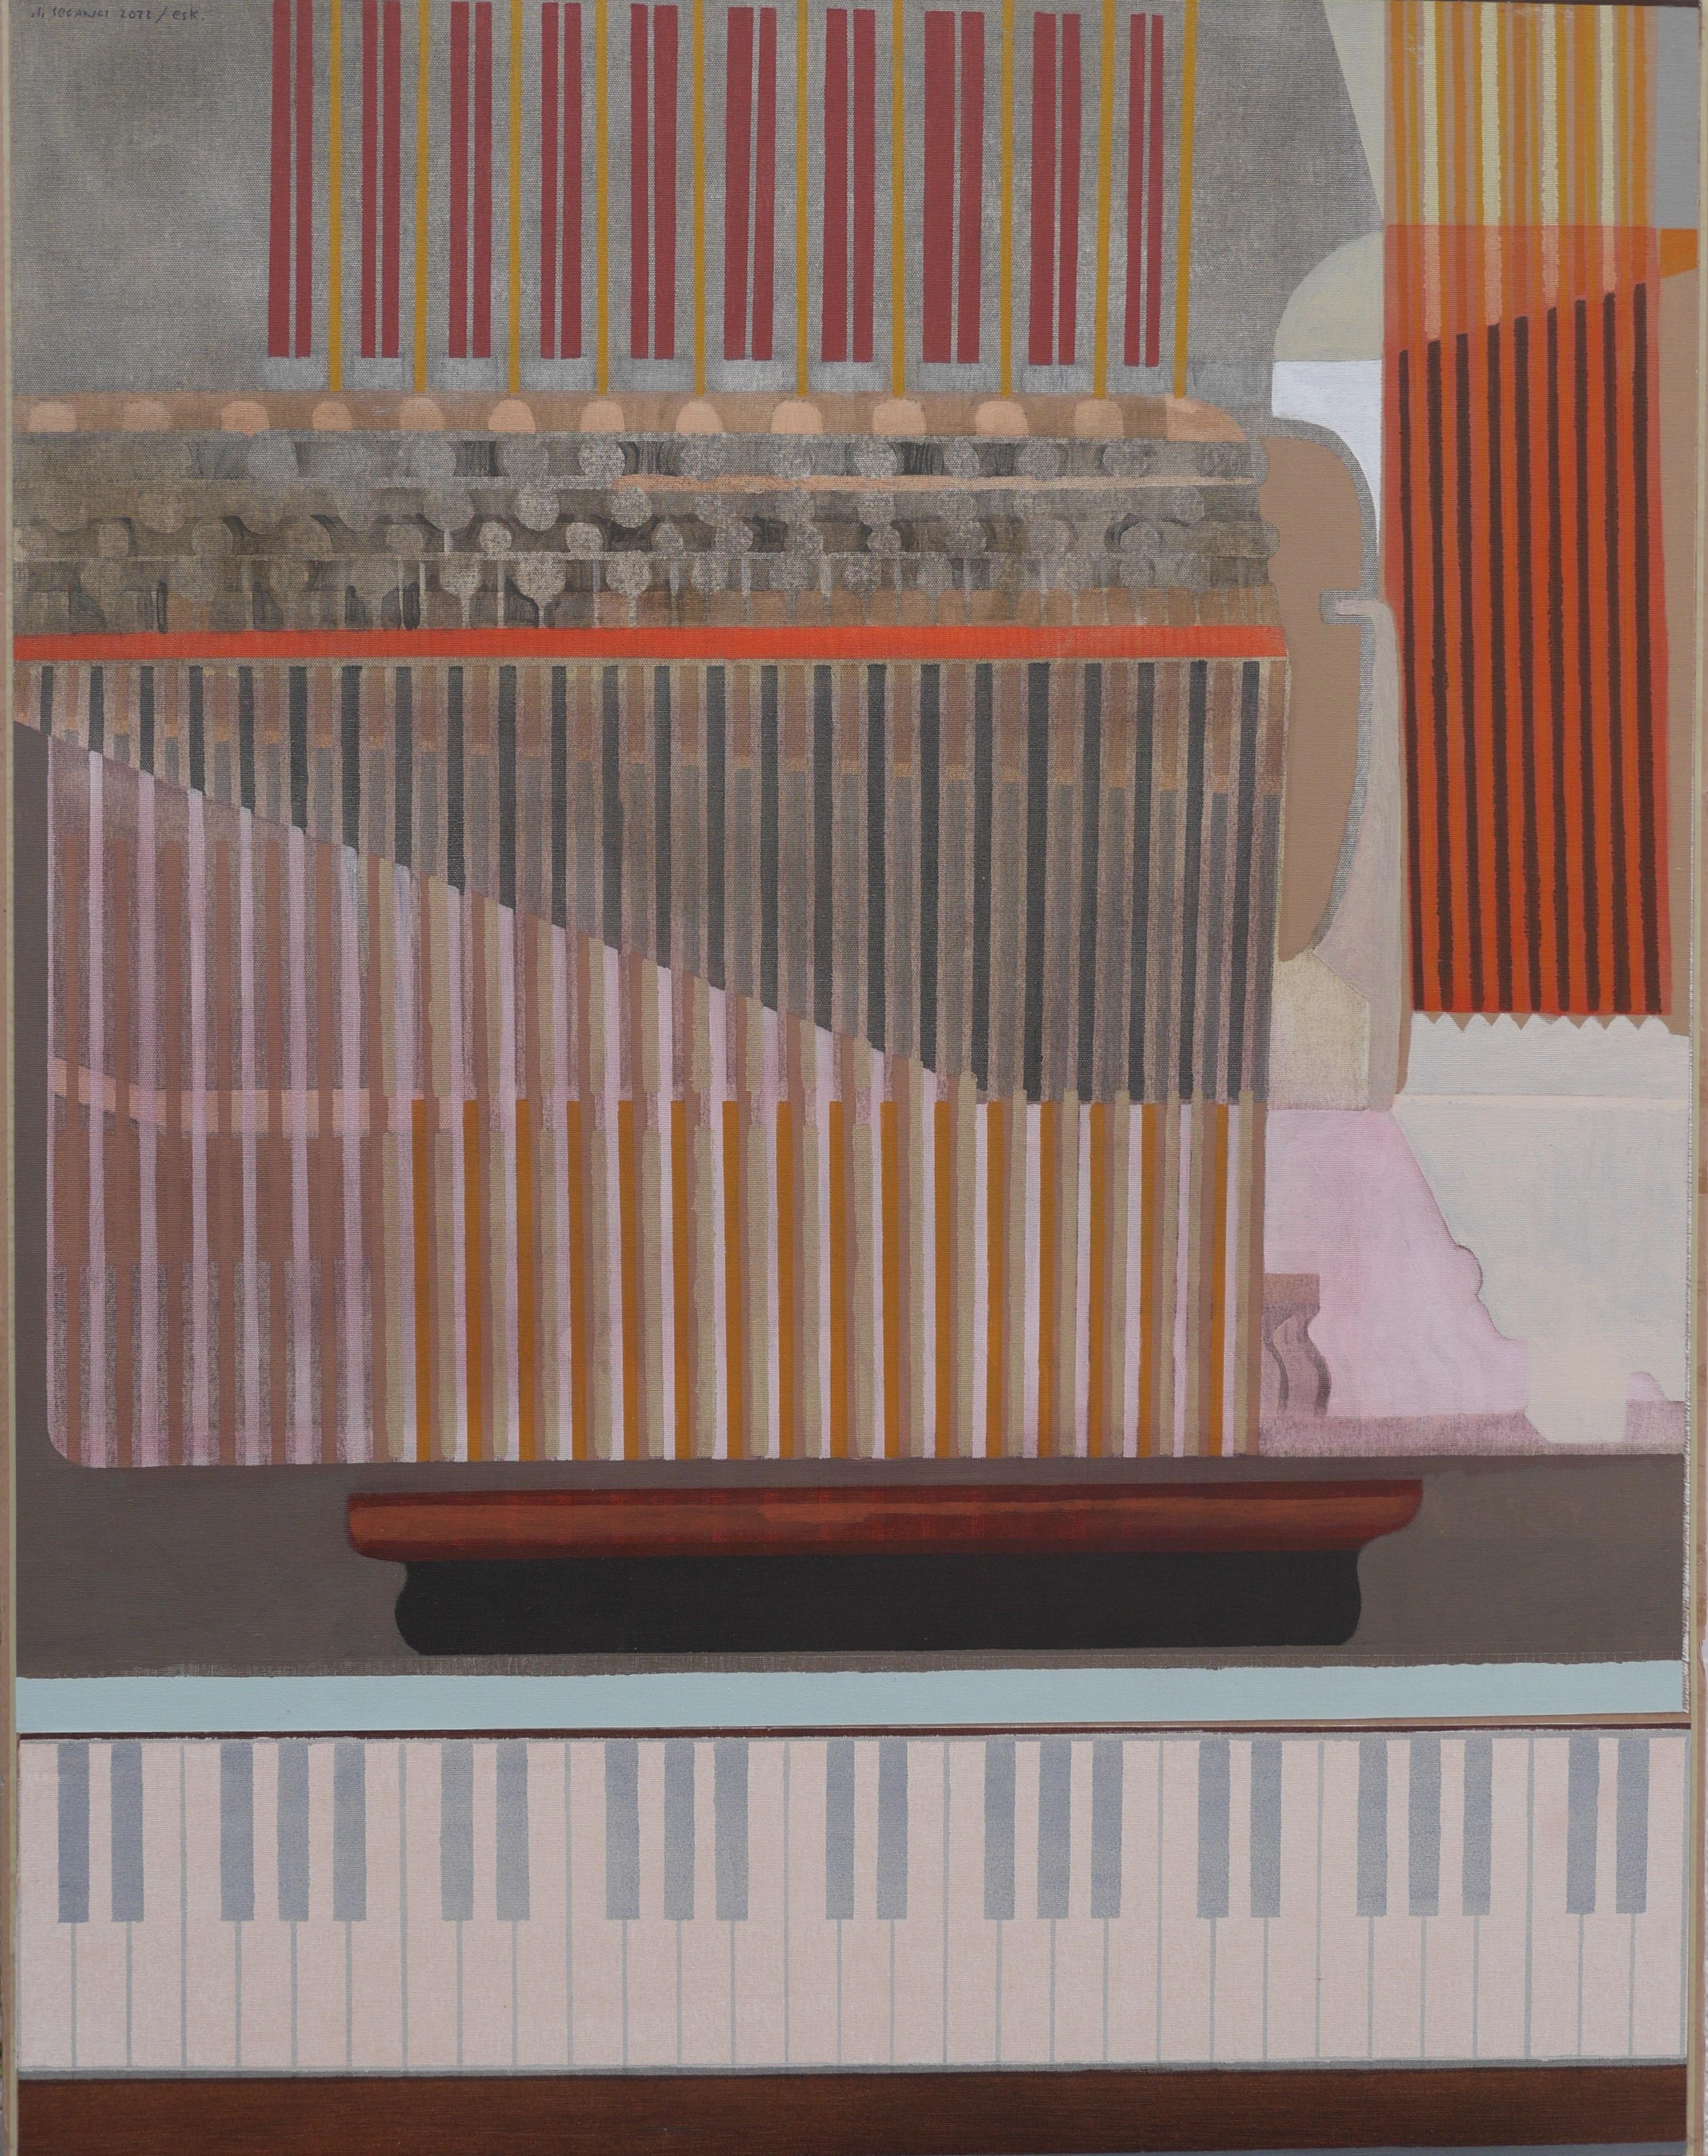 STUDY FOR THE INTERIOR OF A GRAND PIANO  - Painting by İsmail Özgür Soğancı